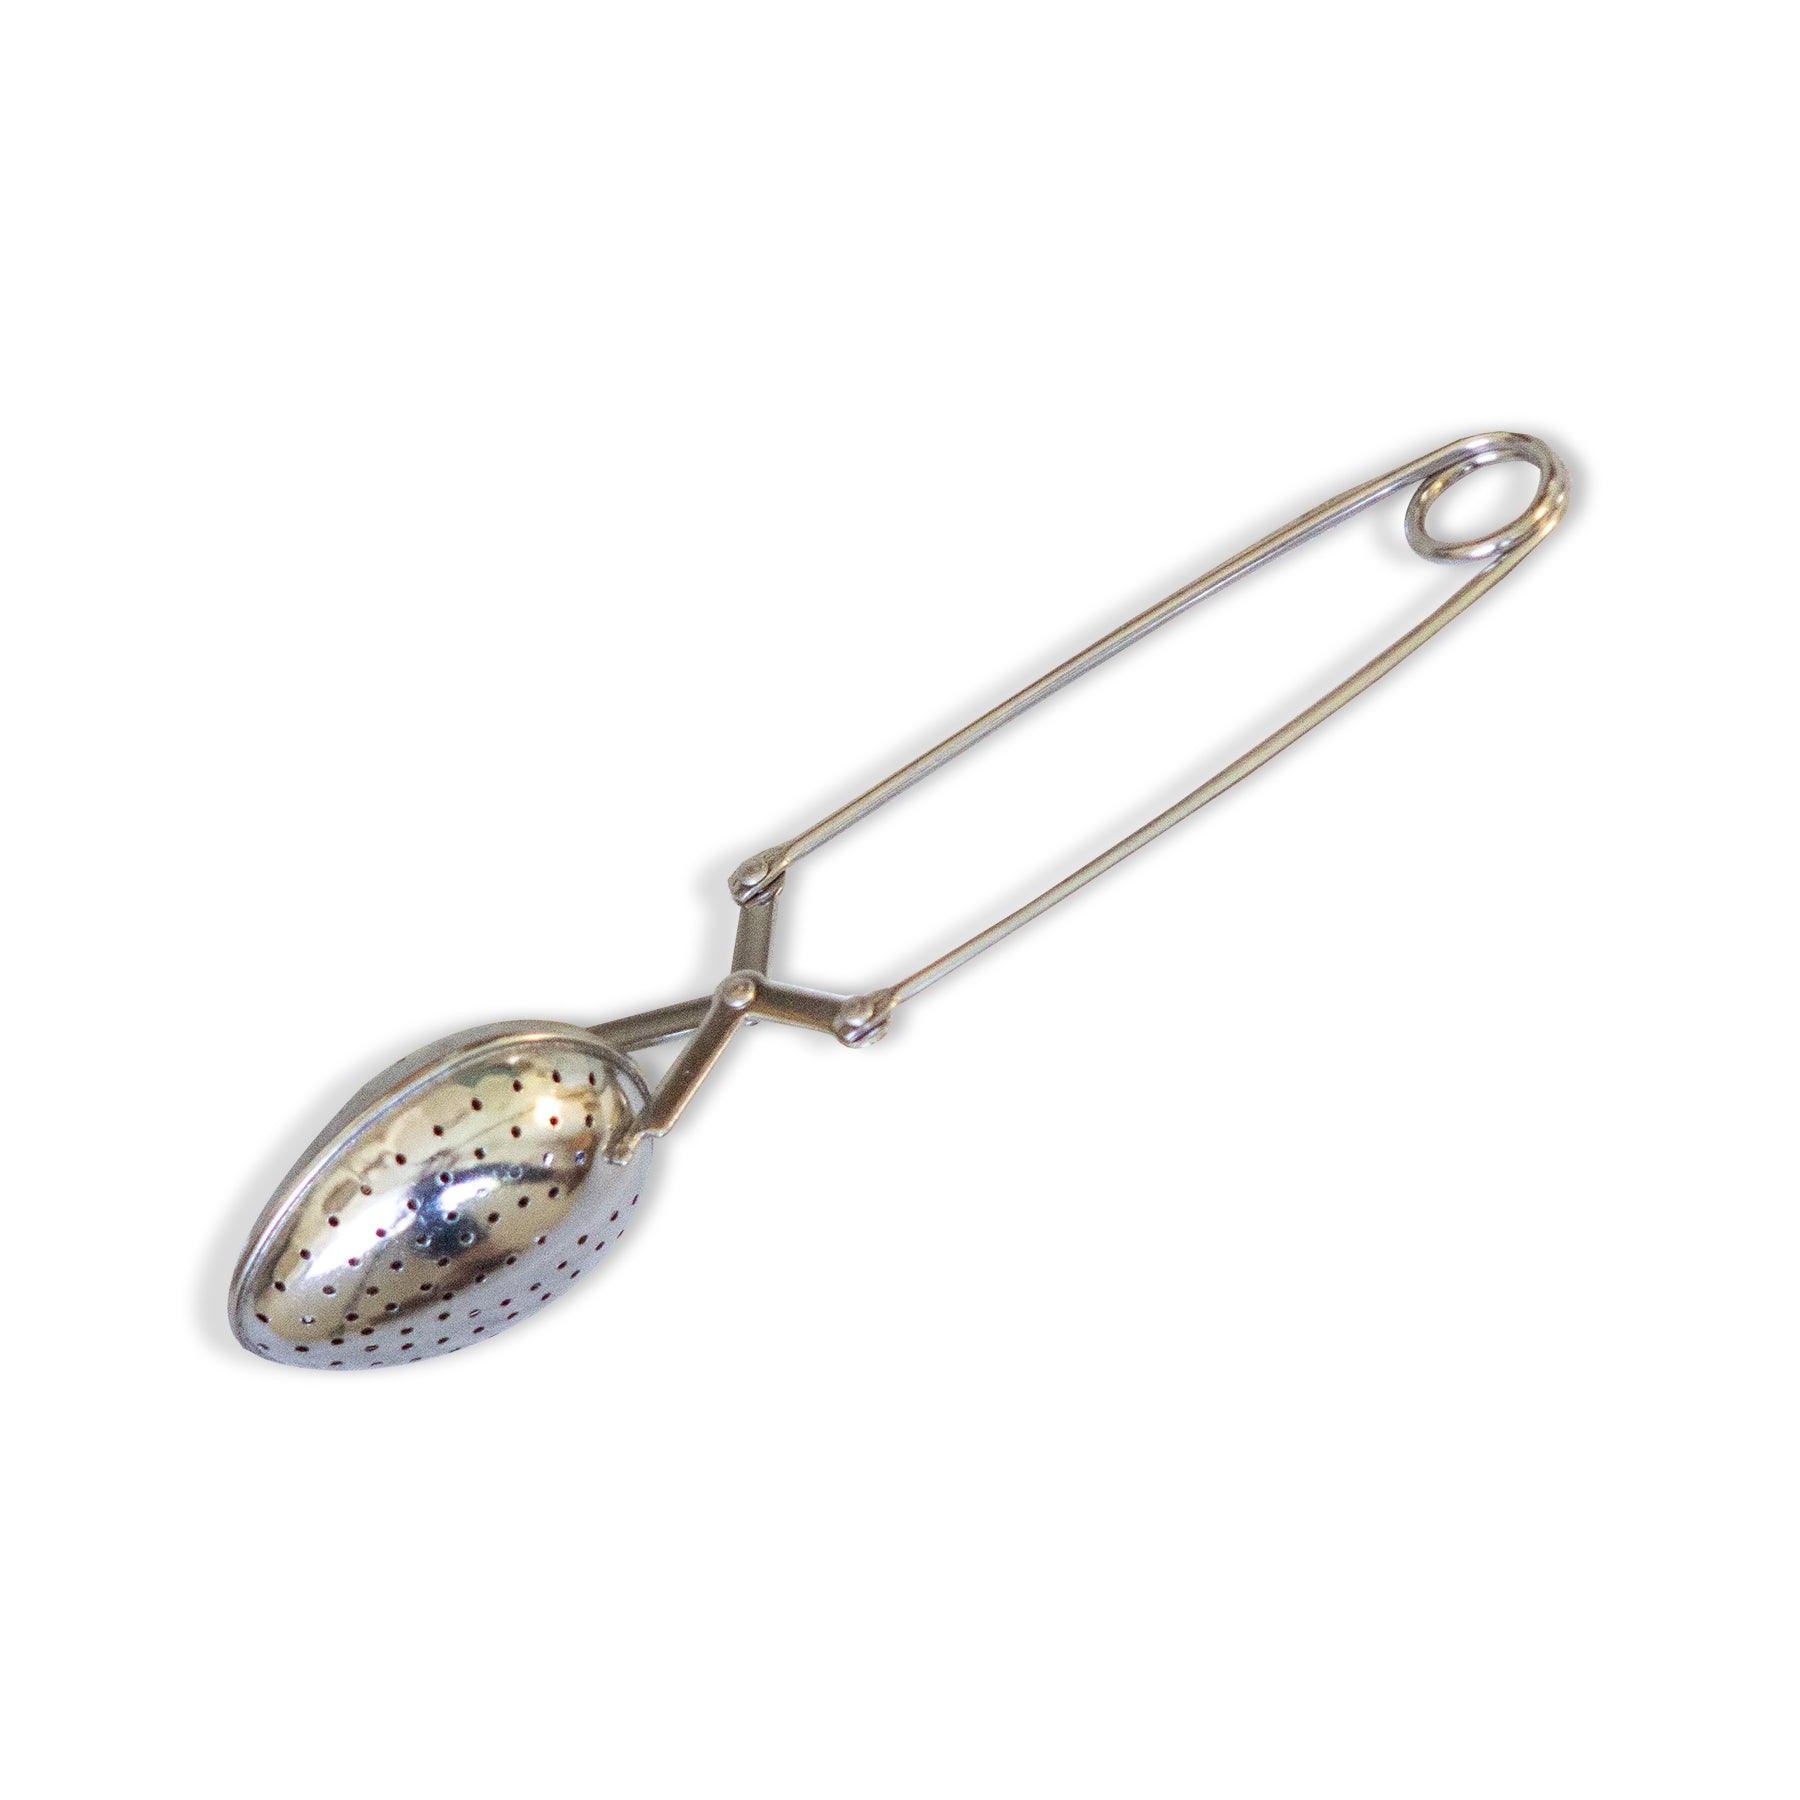 Stainless Steel Tea Infuser - Lavender Life Company